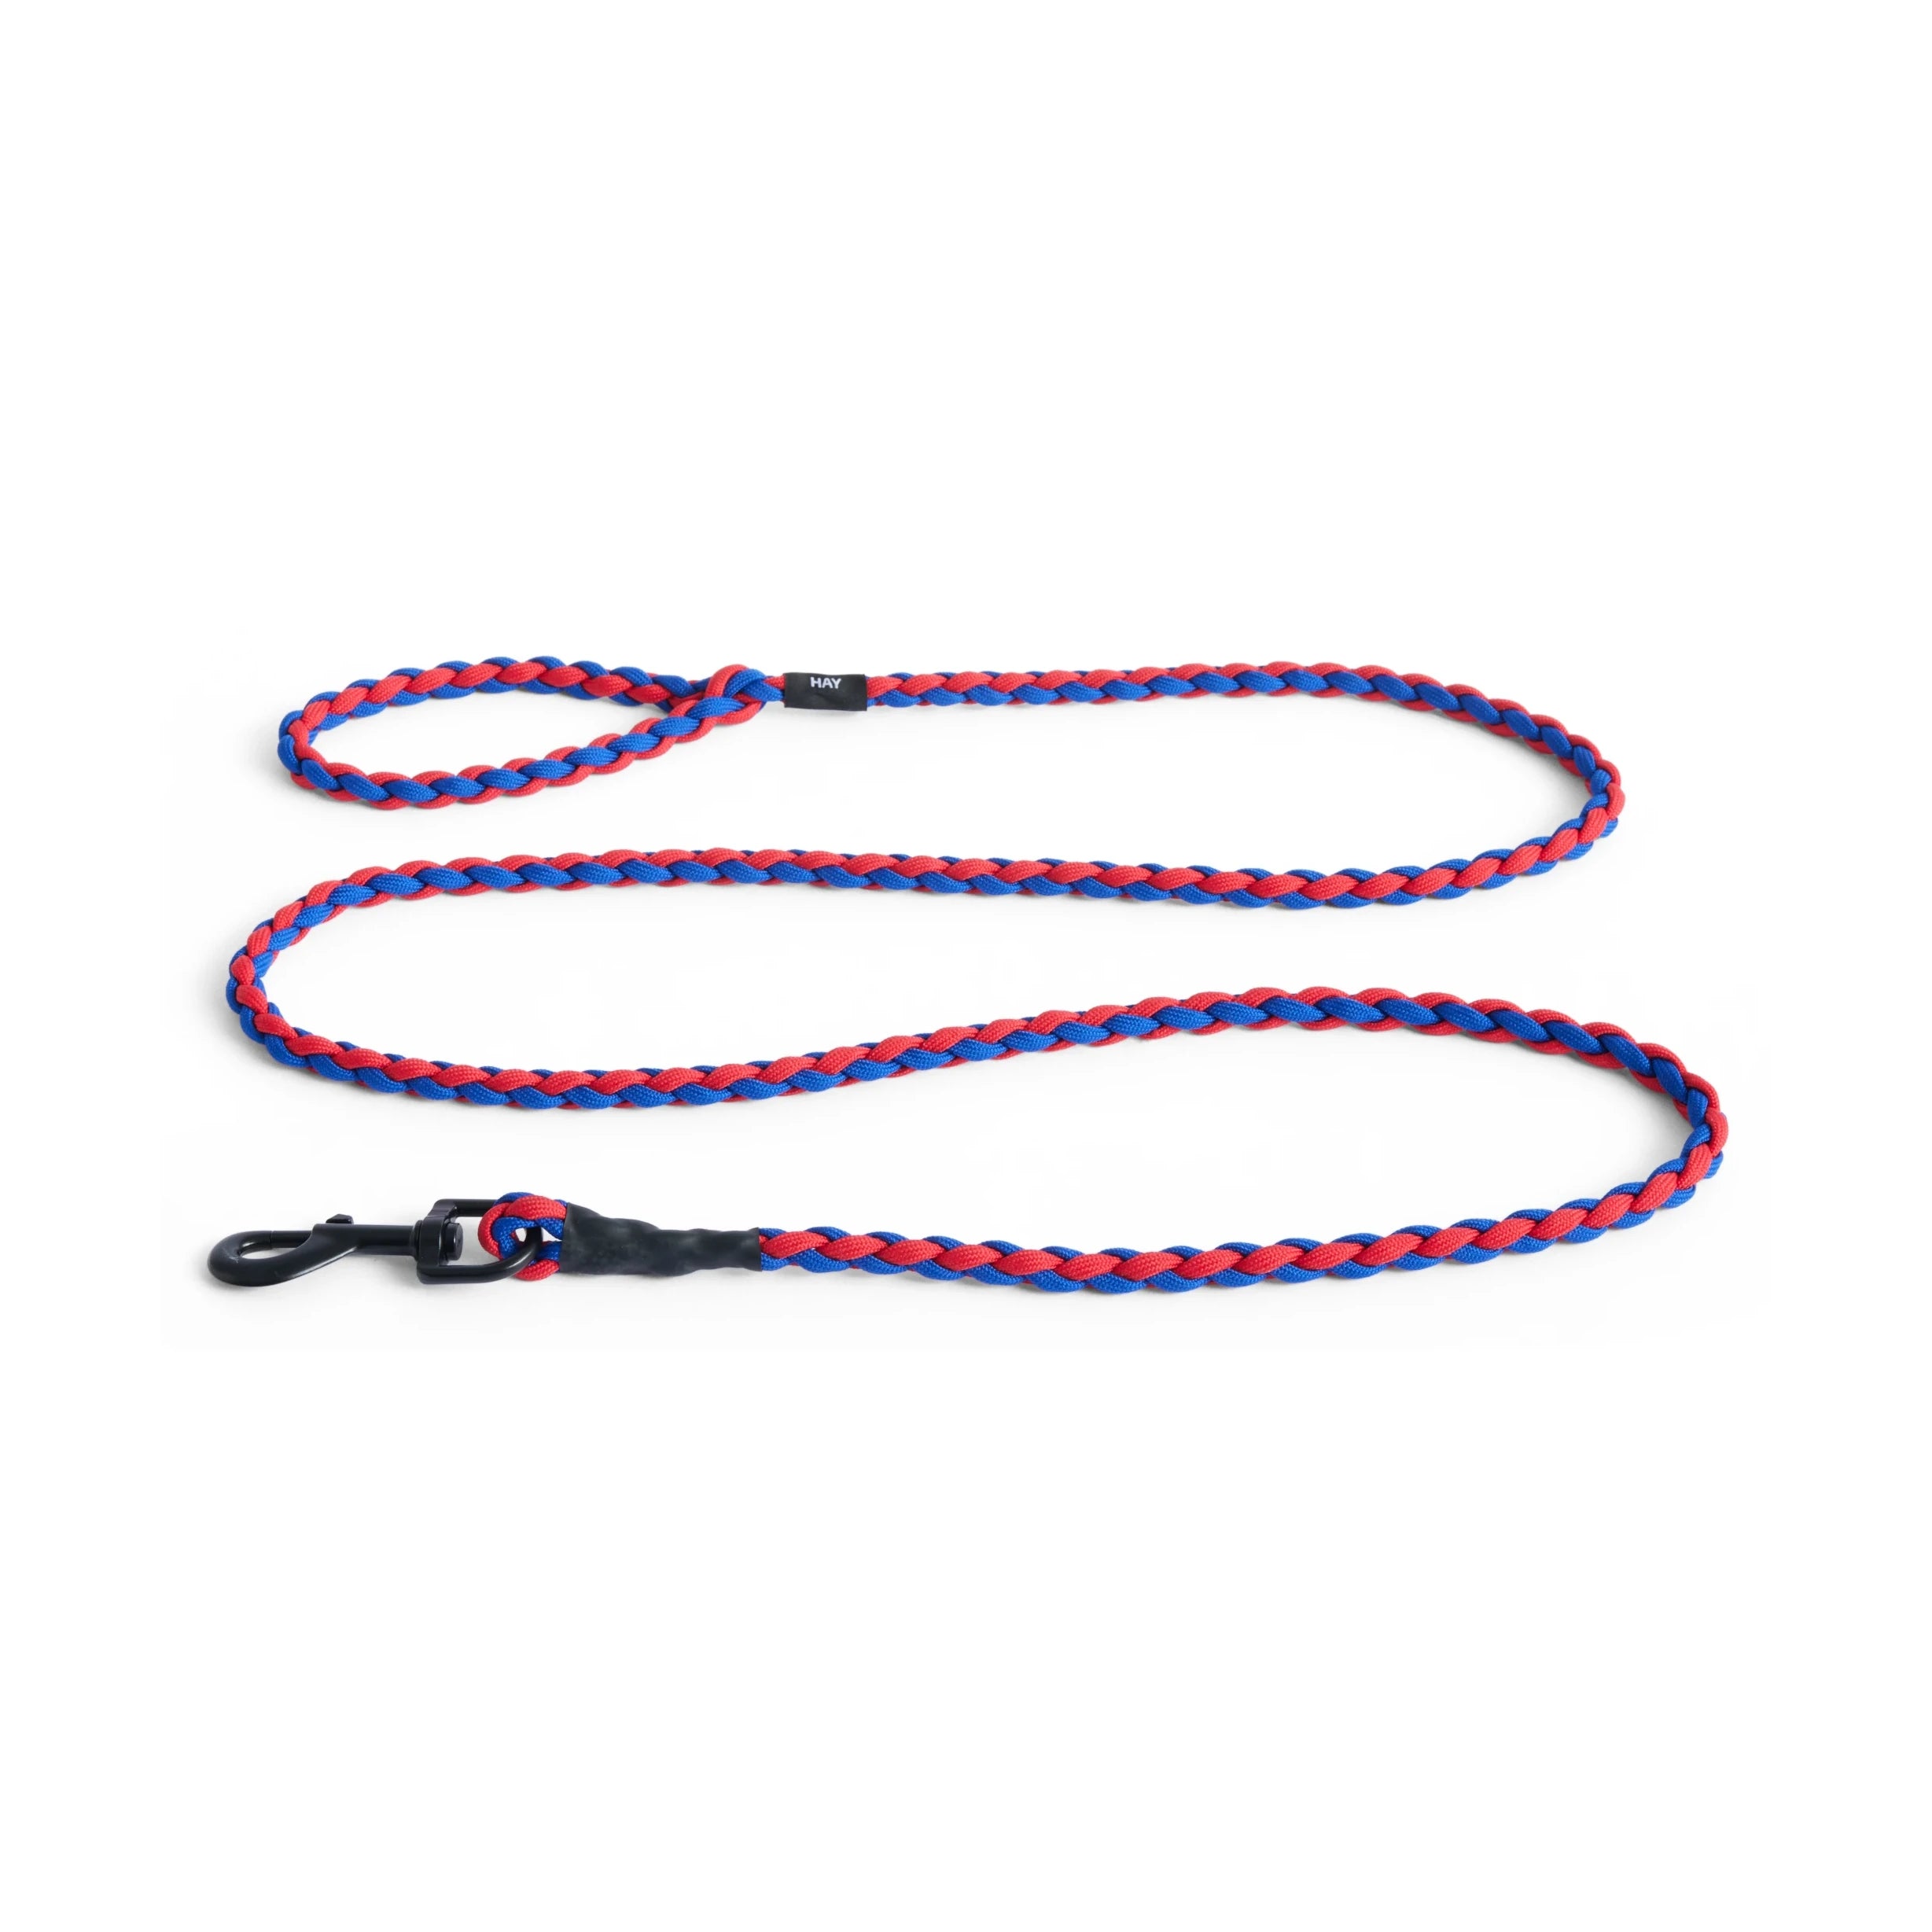 Red and blue braided dog leash from HAY available at Lifestory